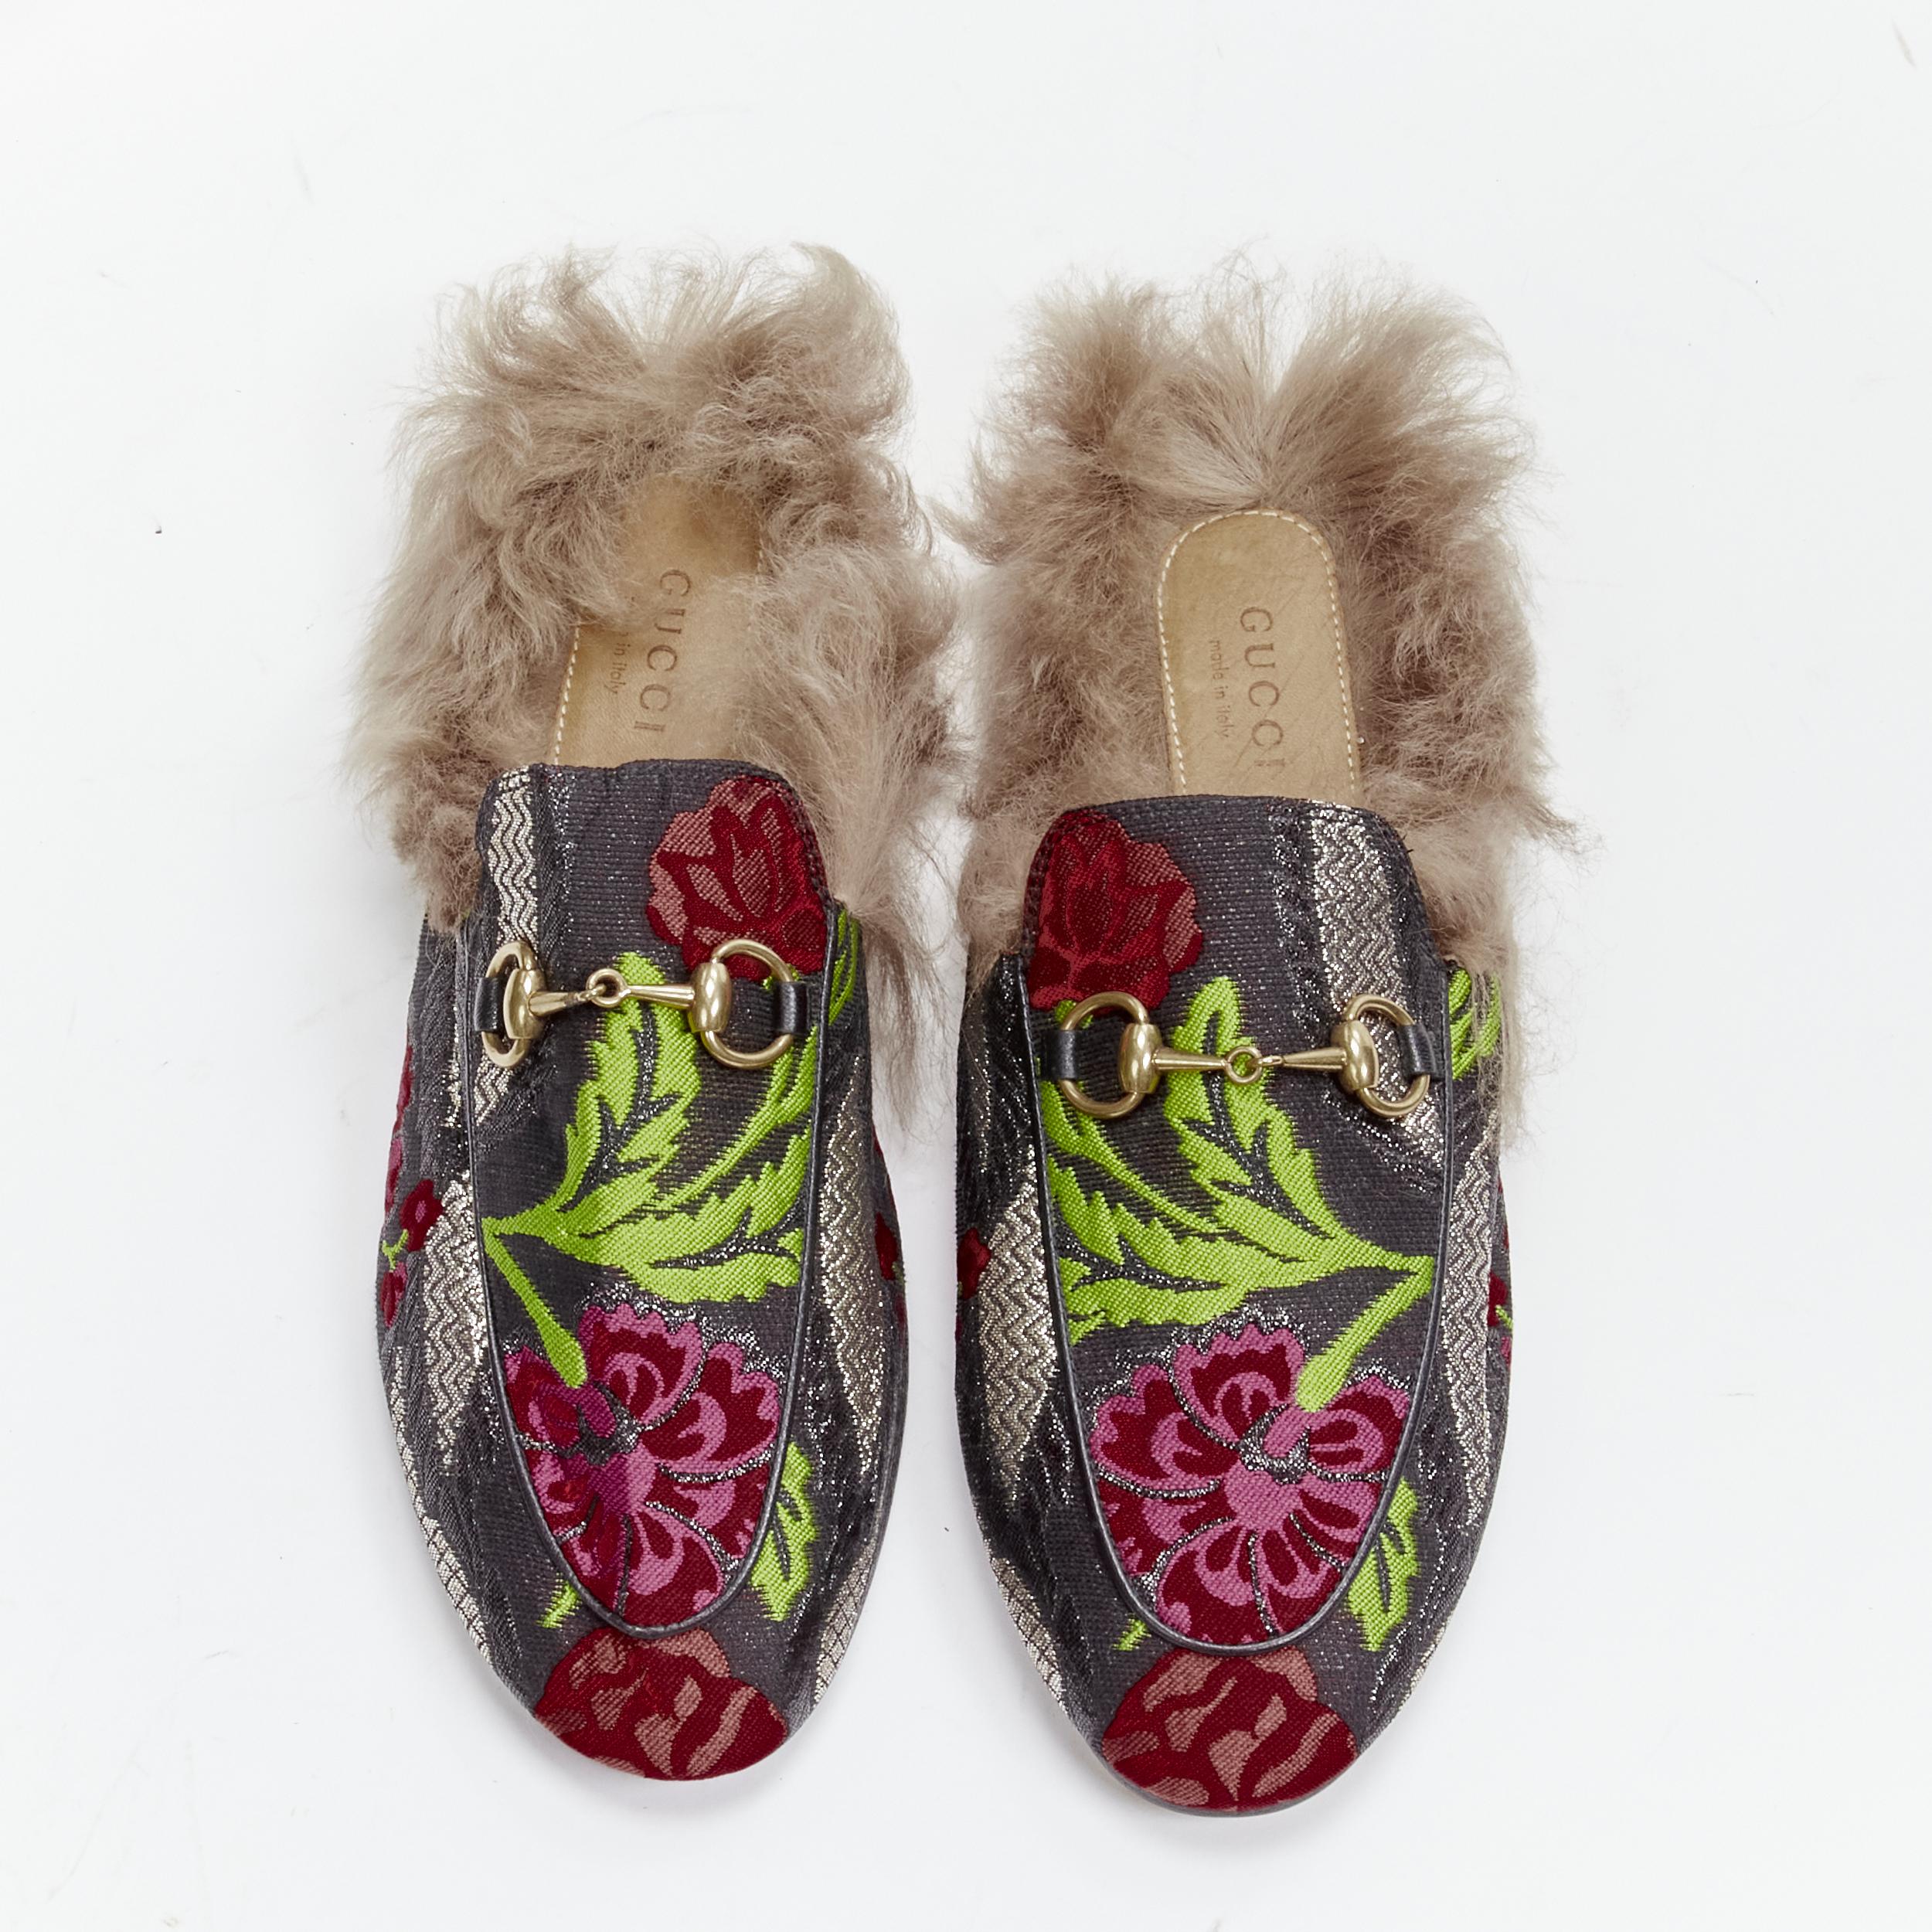 GUCCI Alessandro Michele Princetown floral jacquard fur lined loafer EU36 For Sale 6